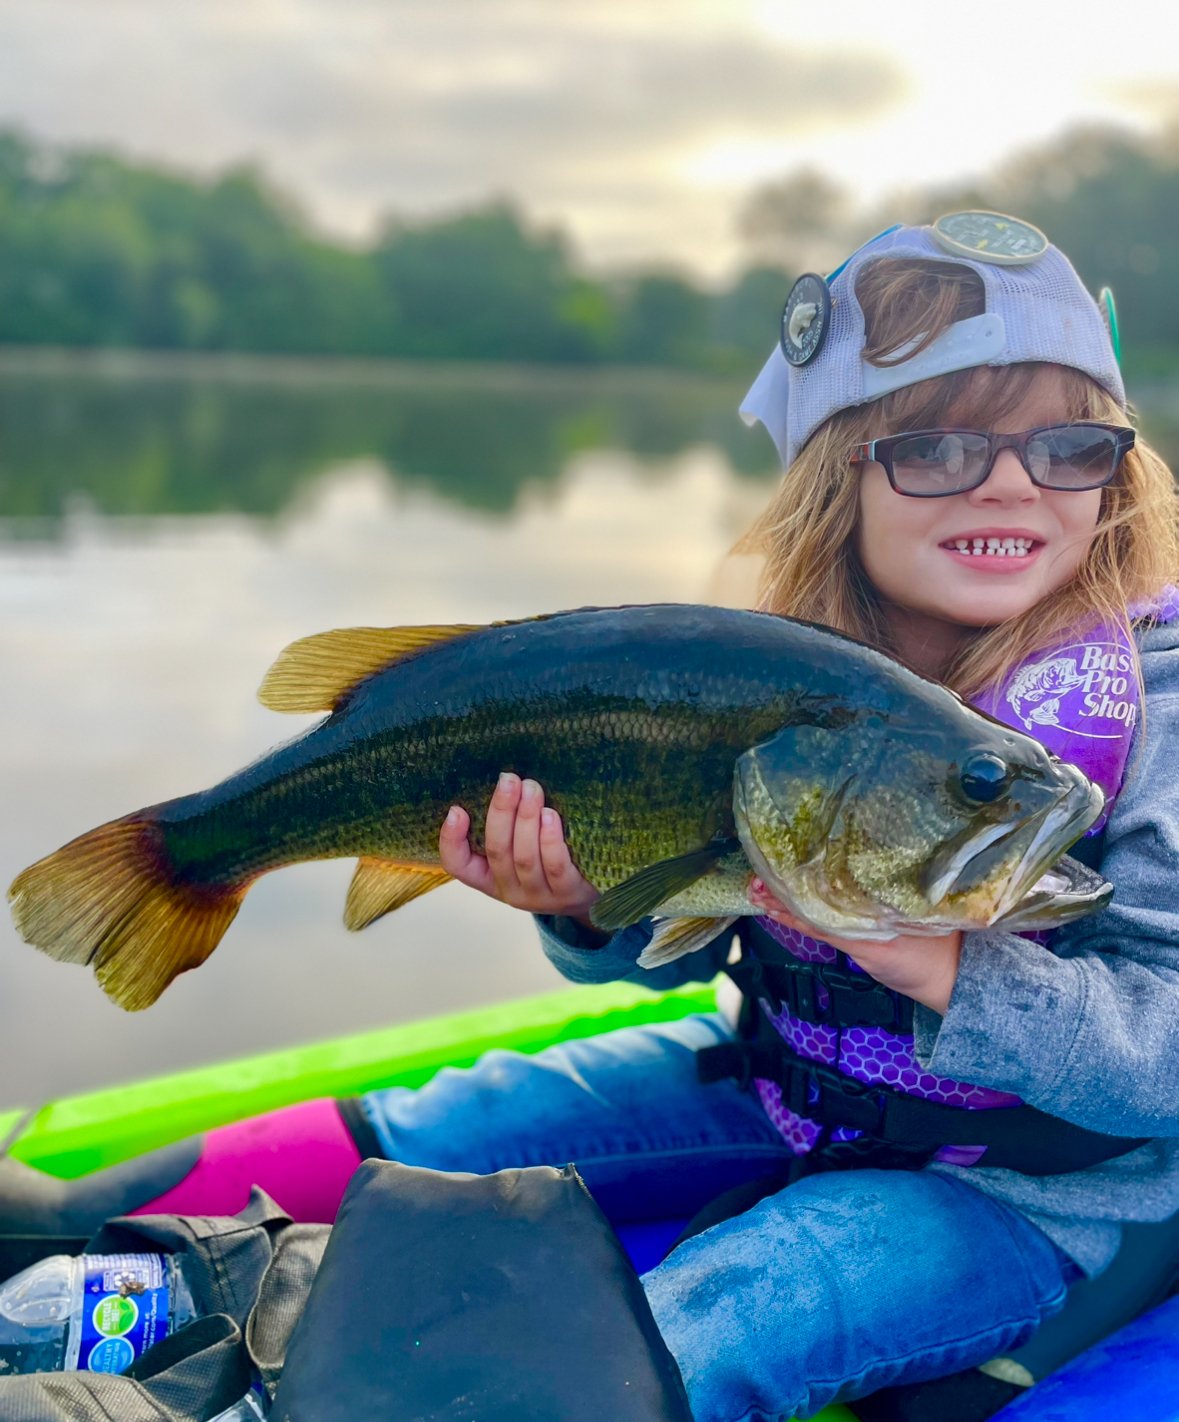 Bass Pro Shops on X: Check out our new feature, the Kid's Braggin' Board!  It's a fun platform to show off your children's best fishing moments. Post  your favorite snaps for a